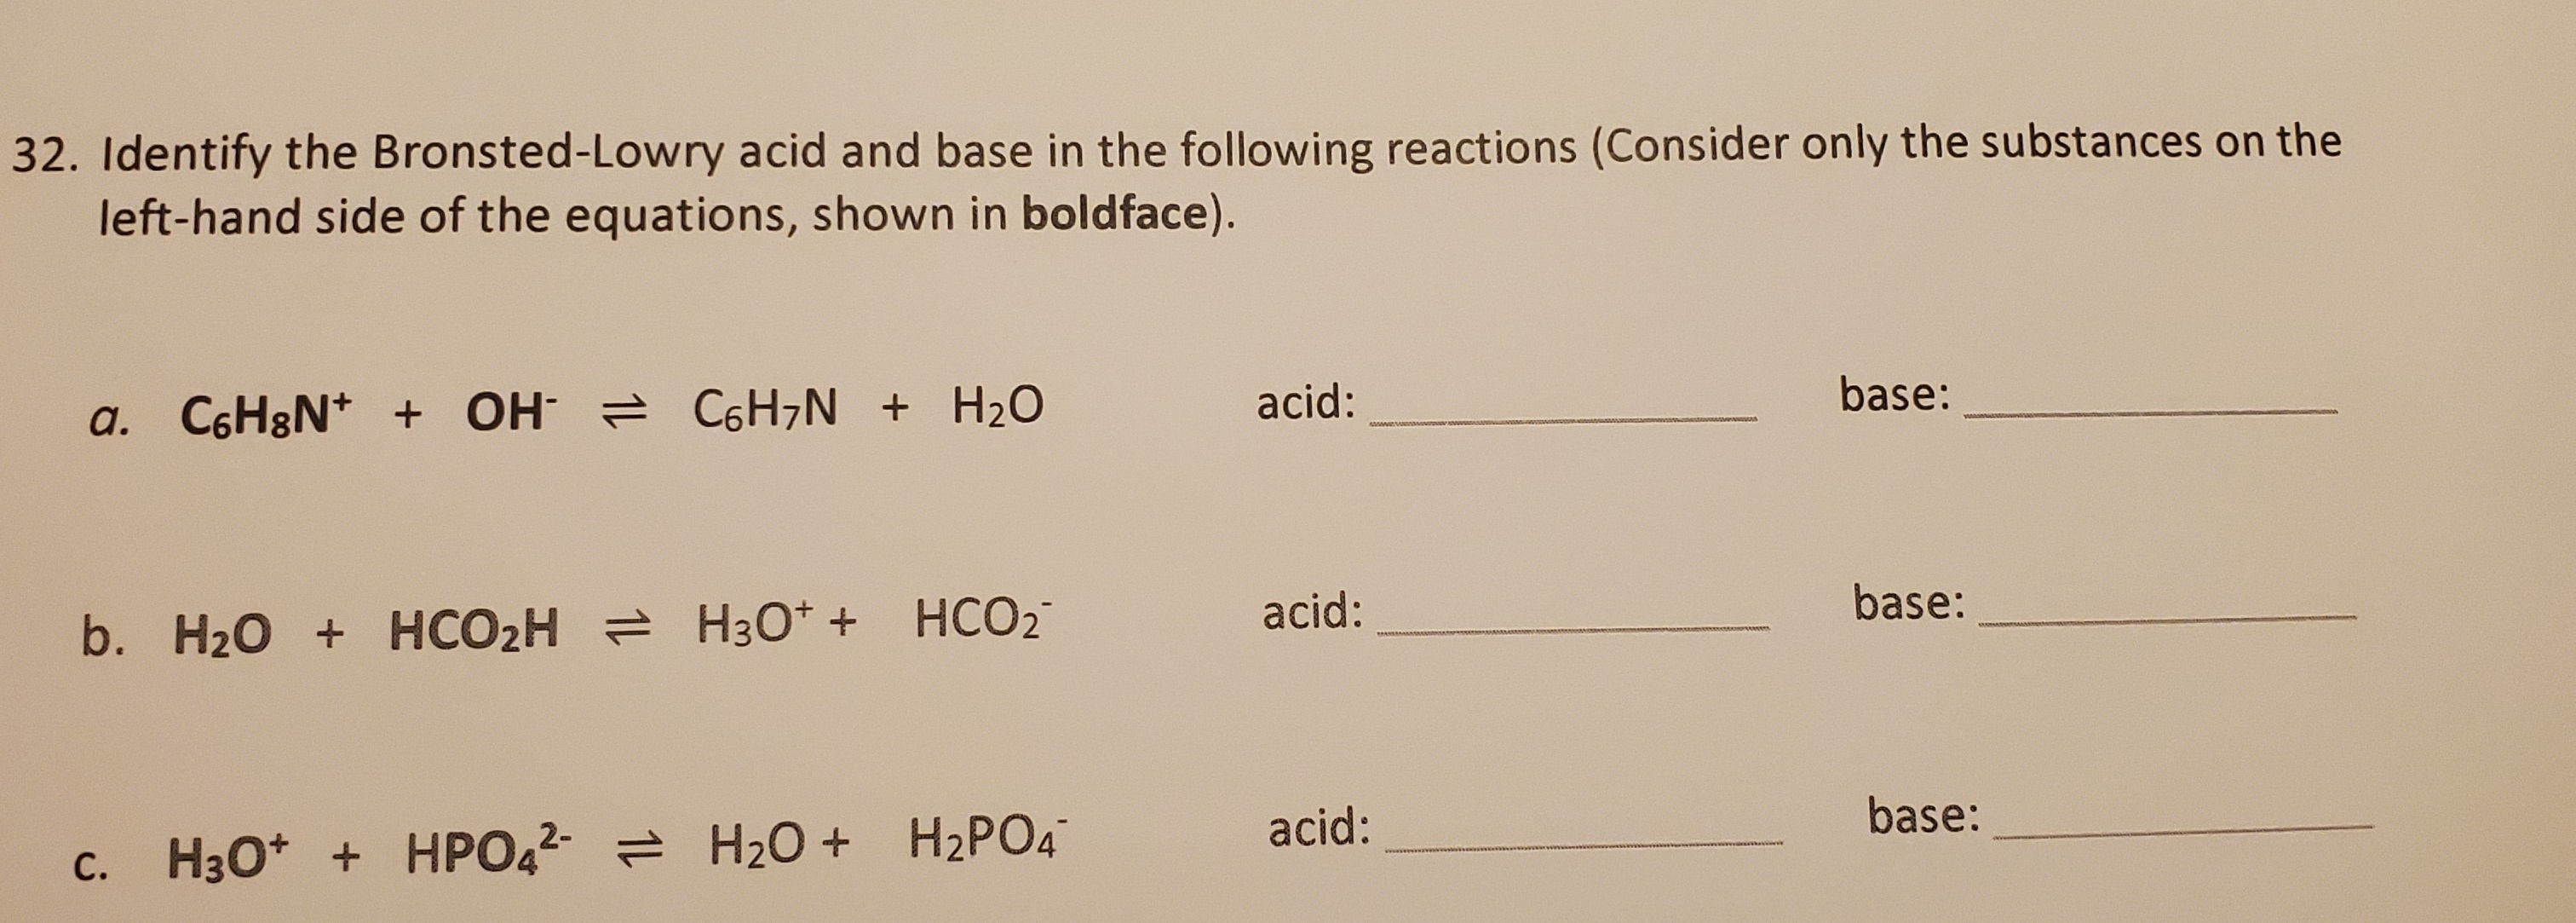 Identify the Bronsted-Lowry acid and base in the following reactions (Consider only the substances on the
left-hand side of the equations, shown in boldface).
a. C6H8N* + OH C6H¬N + H2O
acid:
base:
acid:
base:
b. H20 + HCO2H = H30* + HCO2
acid:
base:
c. H3O* + HPO42 = H20 + H2PO4
